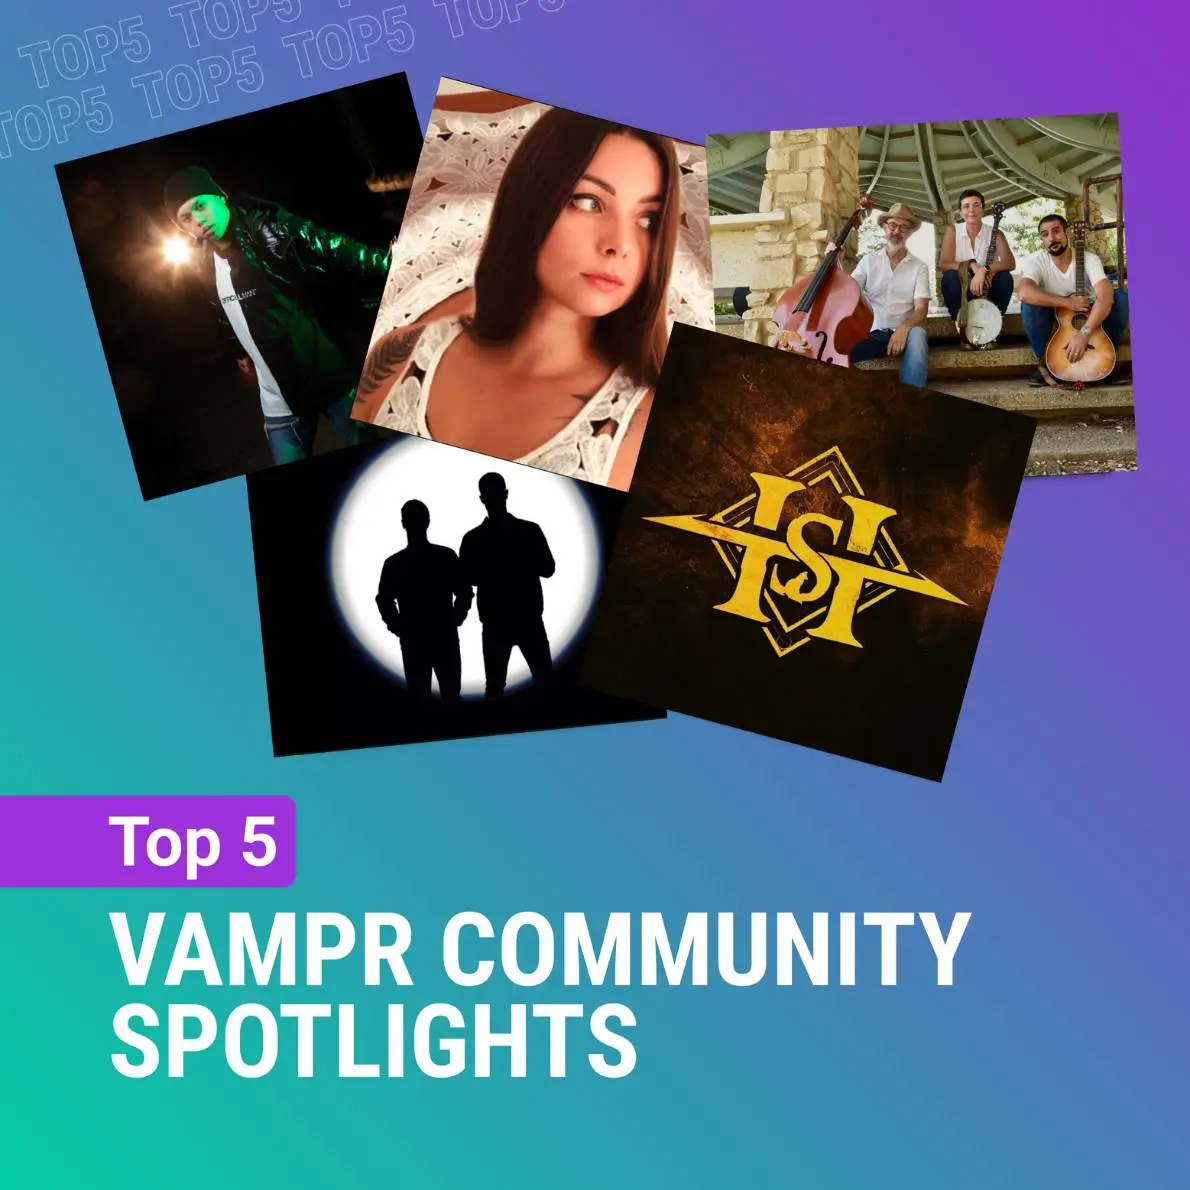 Top 5 Vampr Community Spotlights text with 5 images above of the people spotlighted.